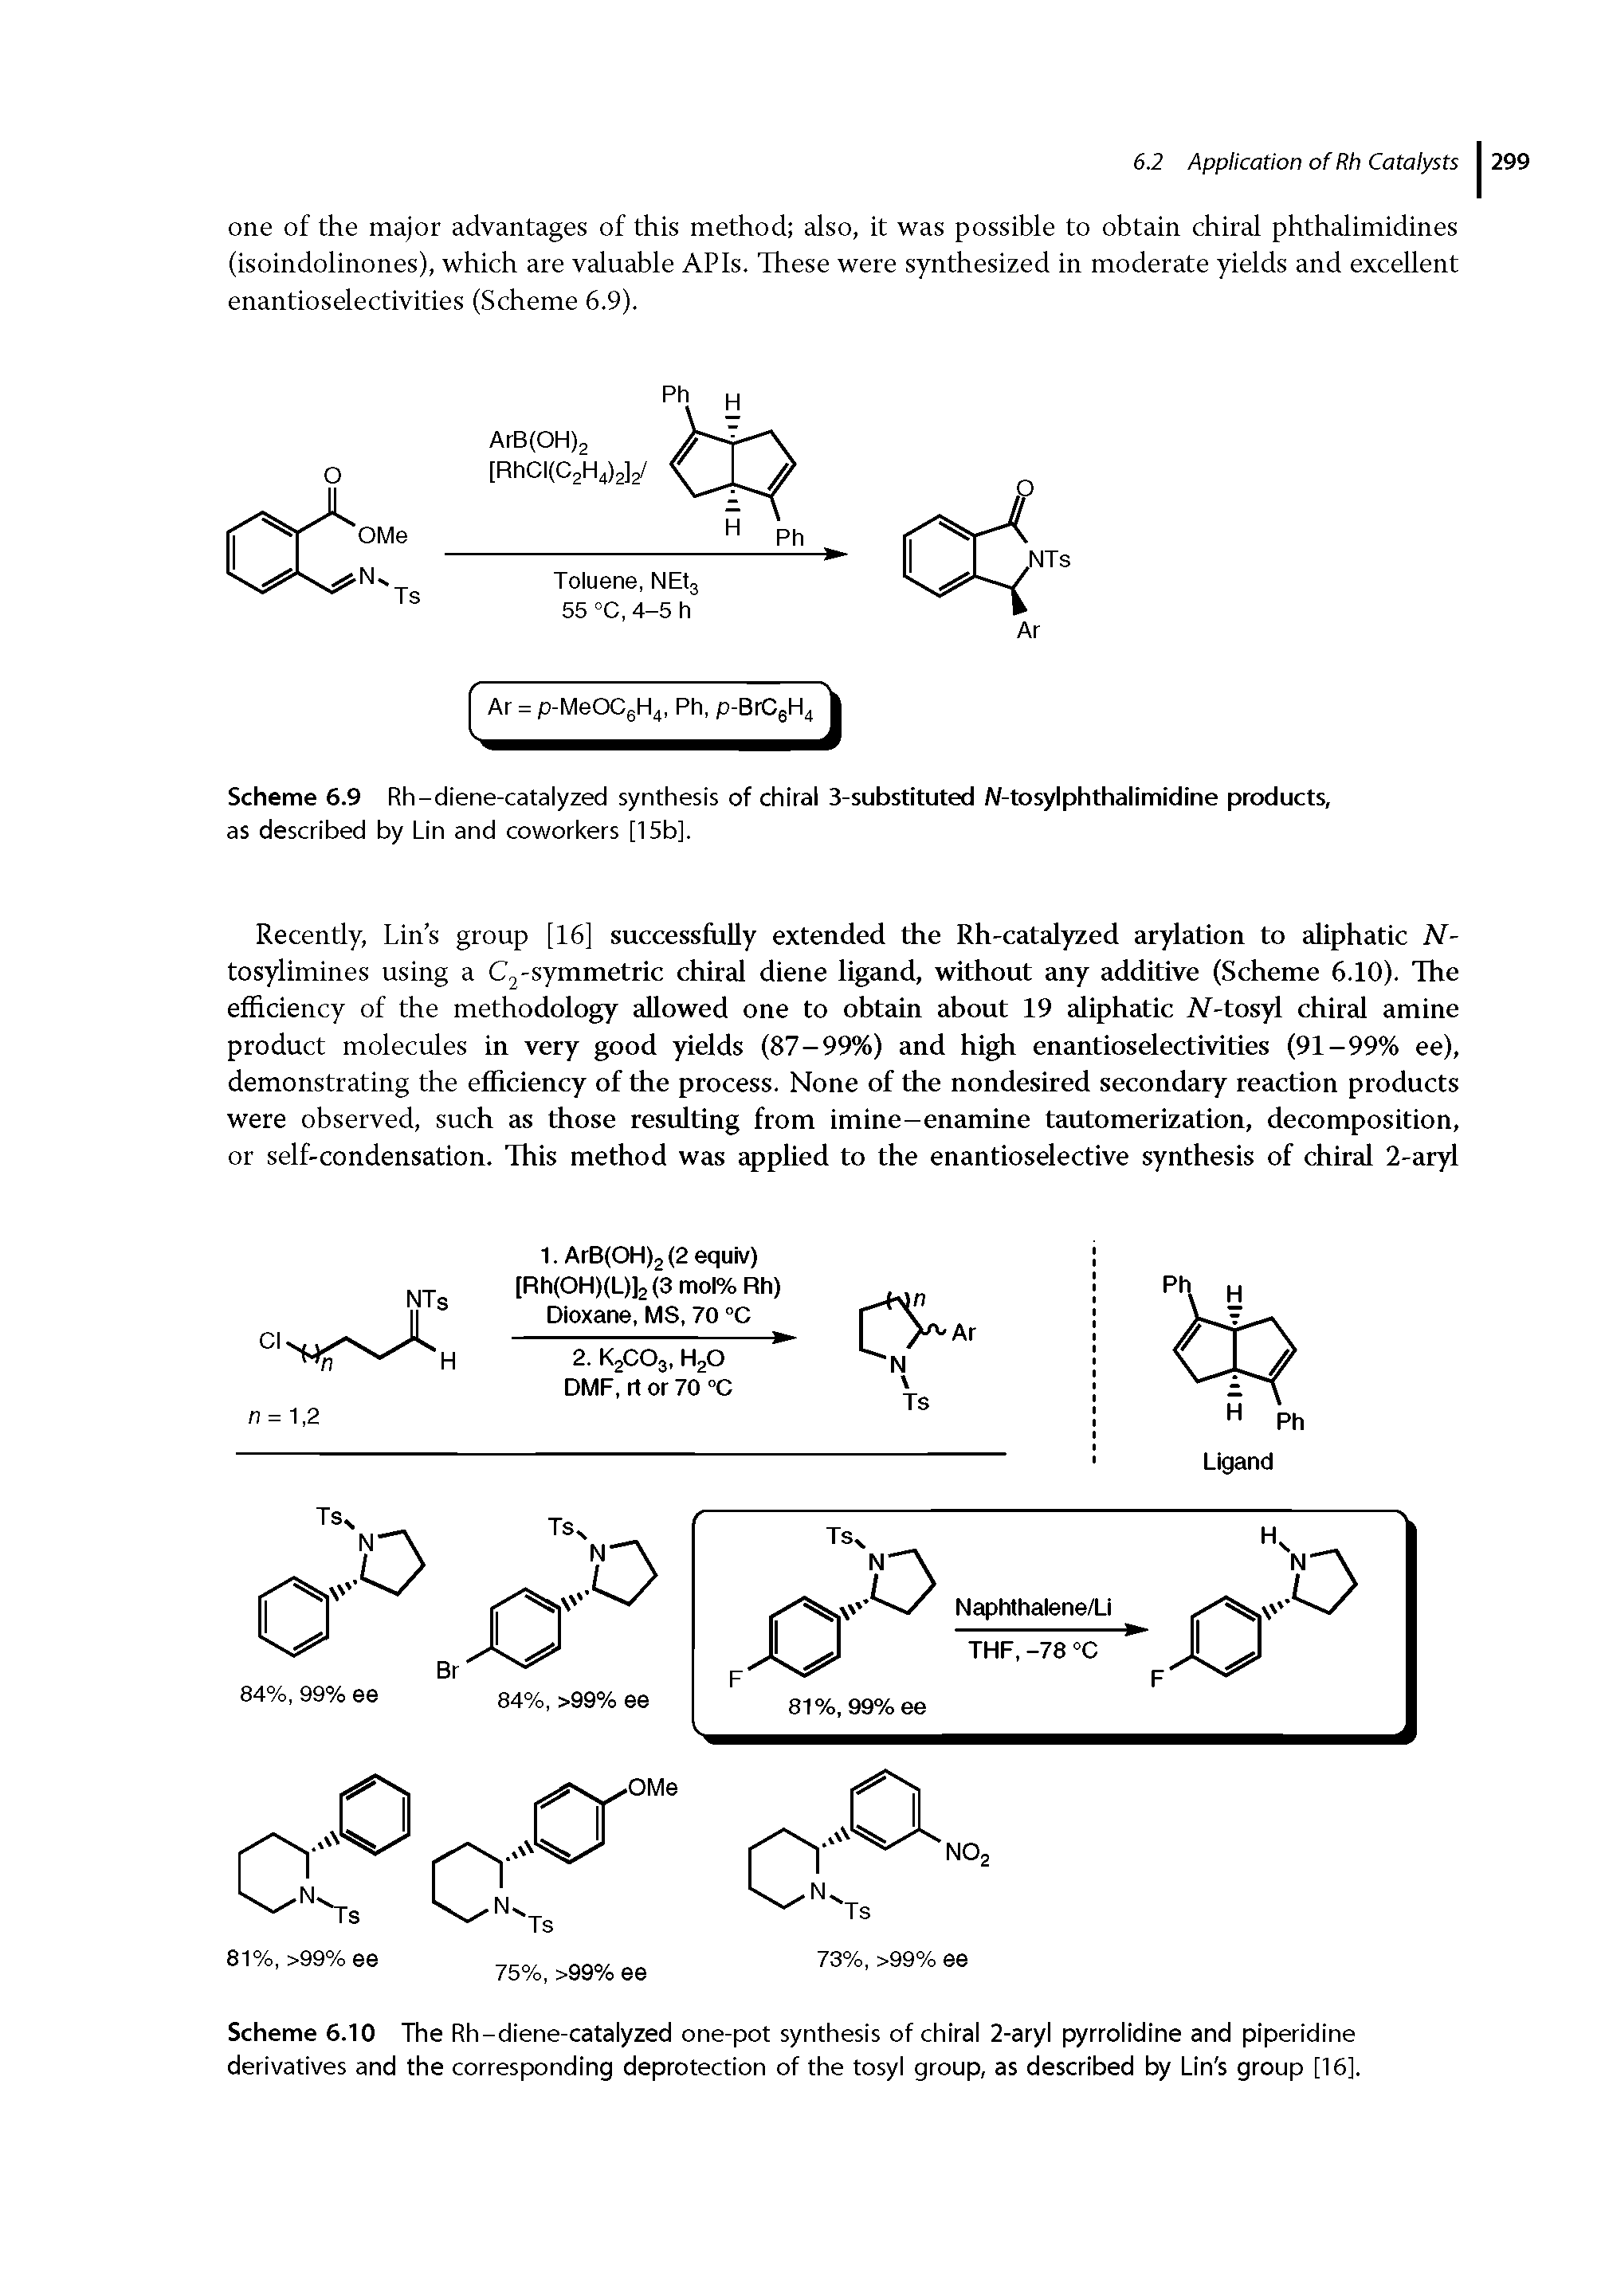 Scheme 6.10 The Rh-diene-catalyzed one-pot synthesis of chiral 2-aryl pyrrolidine and piperidine derivatives and the corresponding deprotection of the tosyl group, as described by Lin s group [16],...